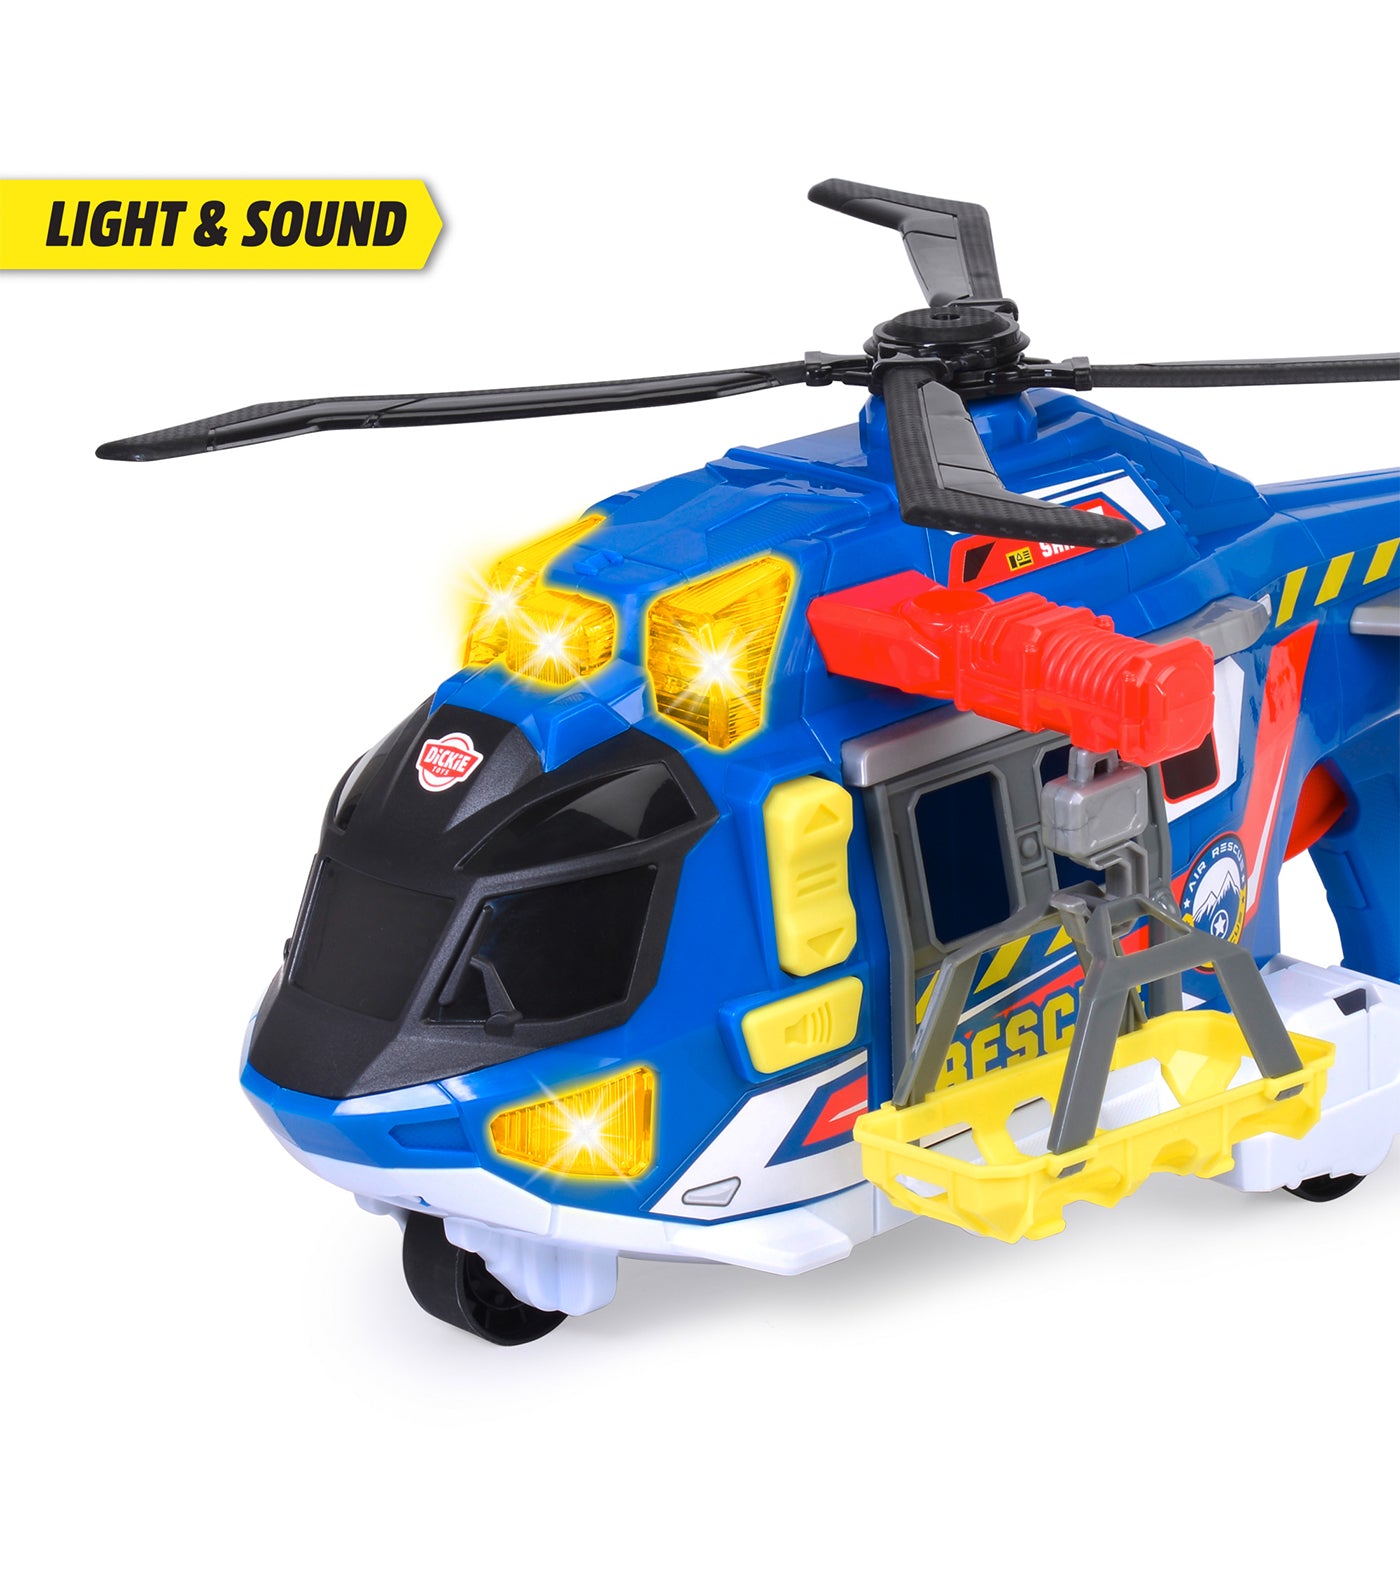 Rescue Helicopter - 39cm